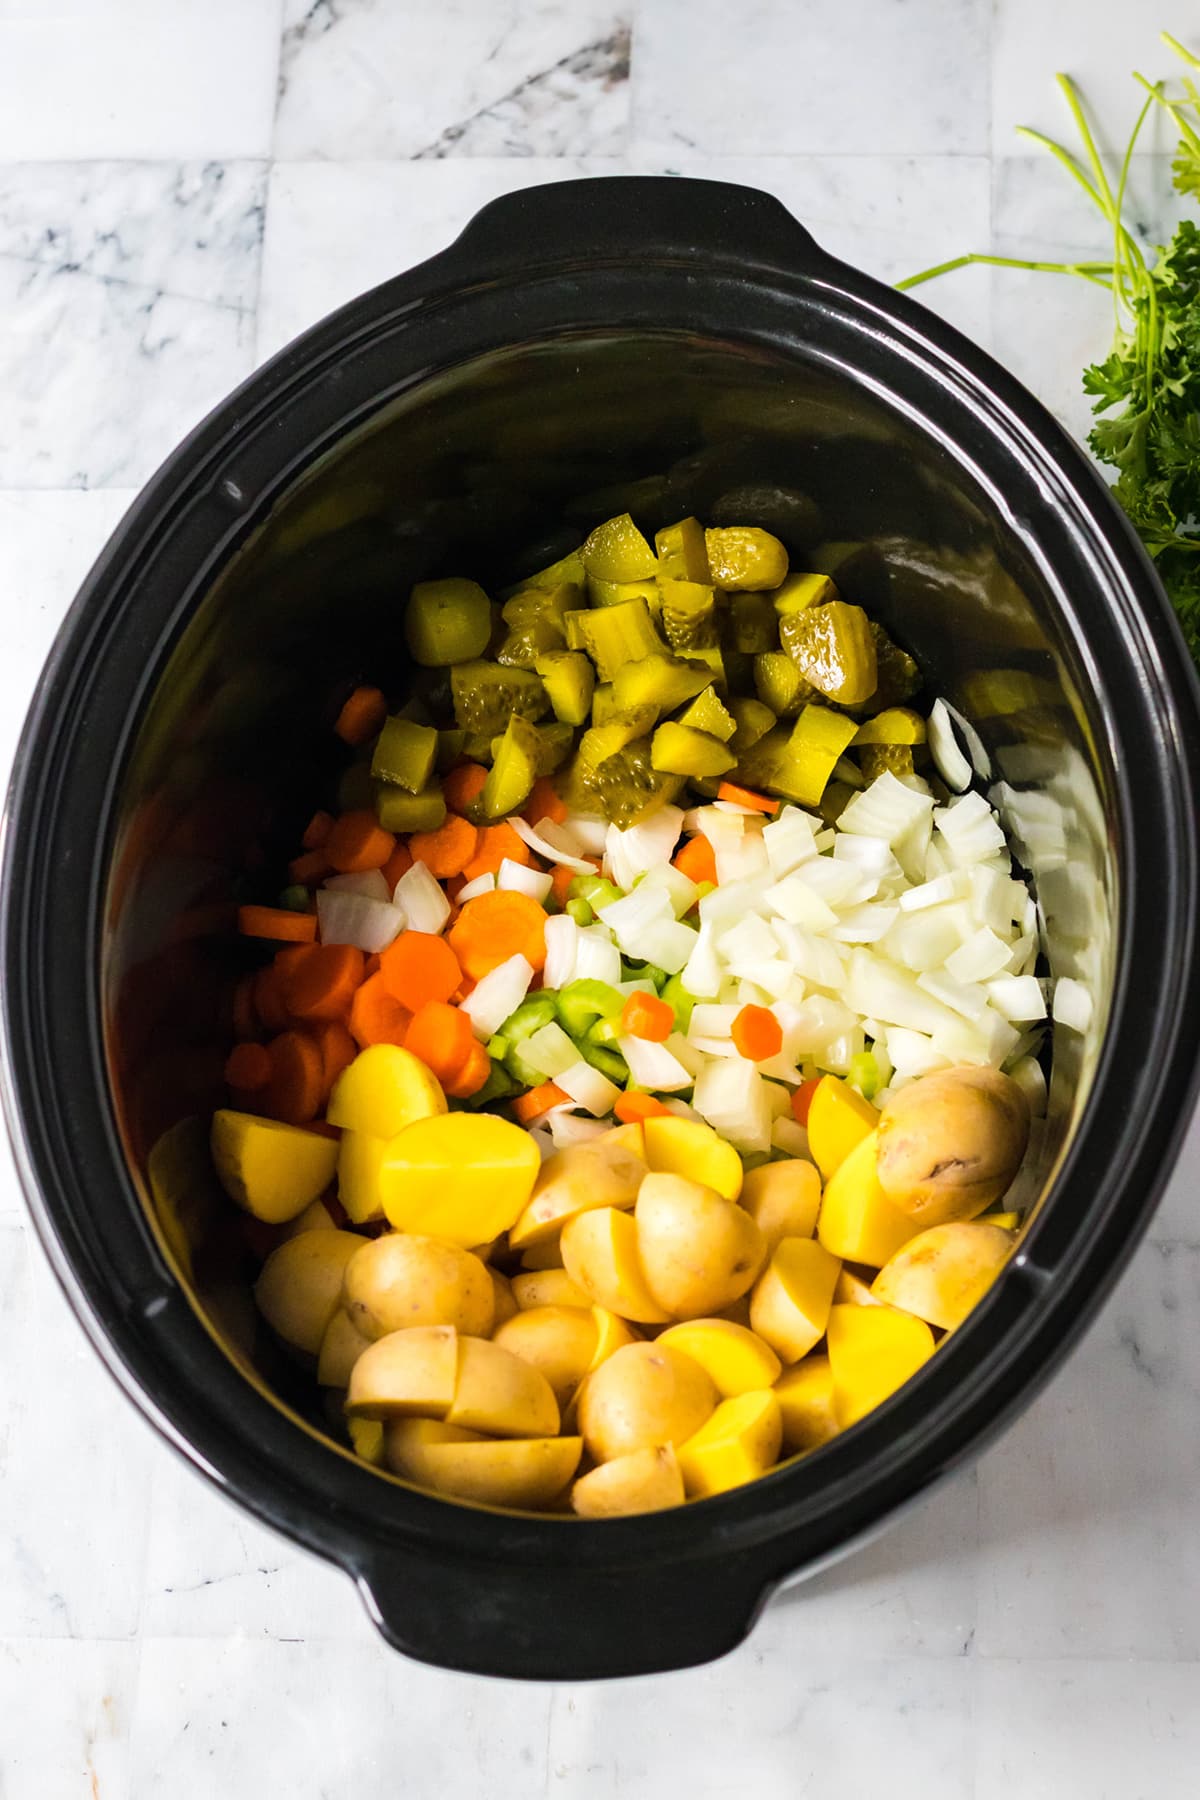 Vegetable slices were layered in the crockpot.